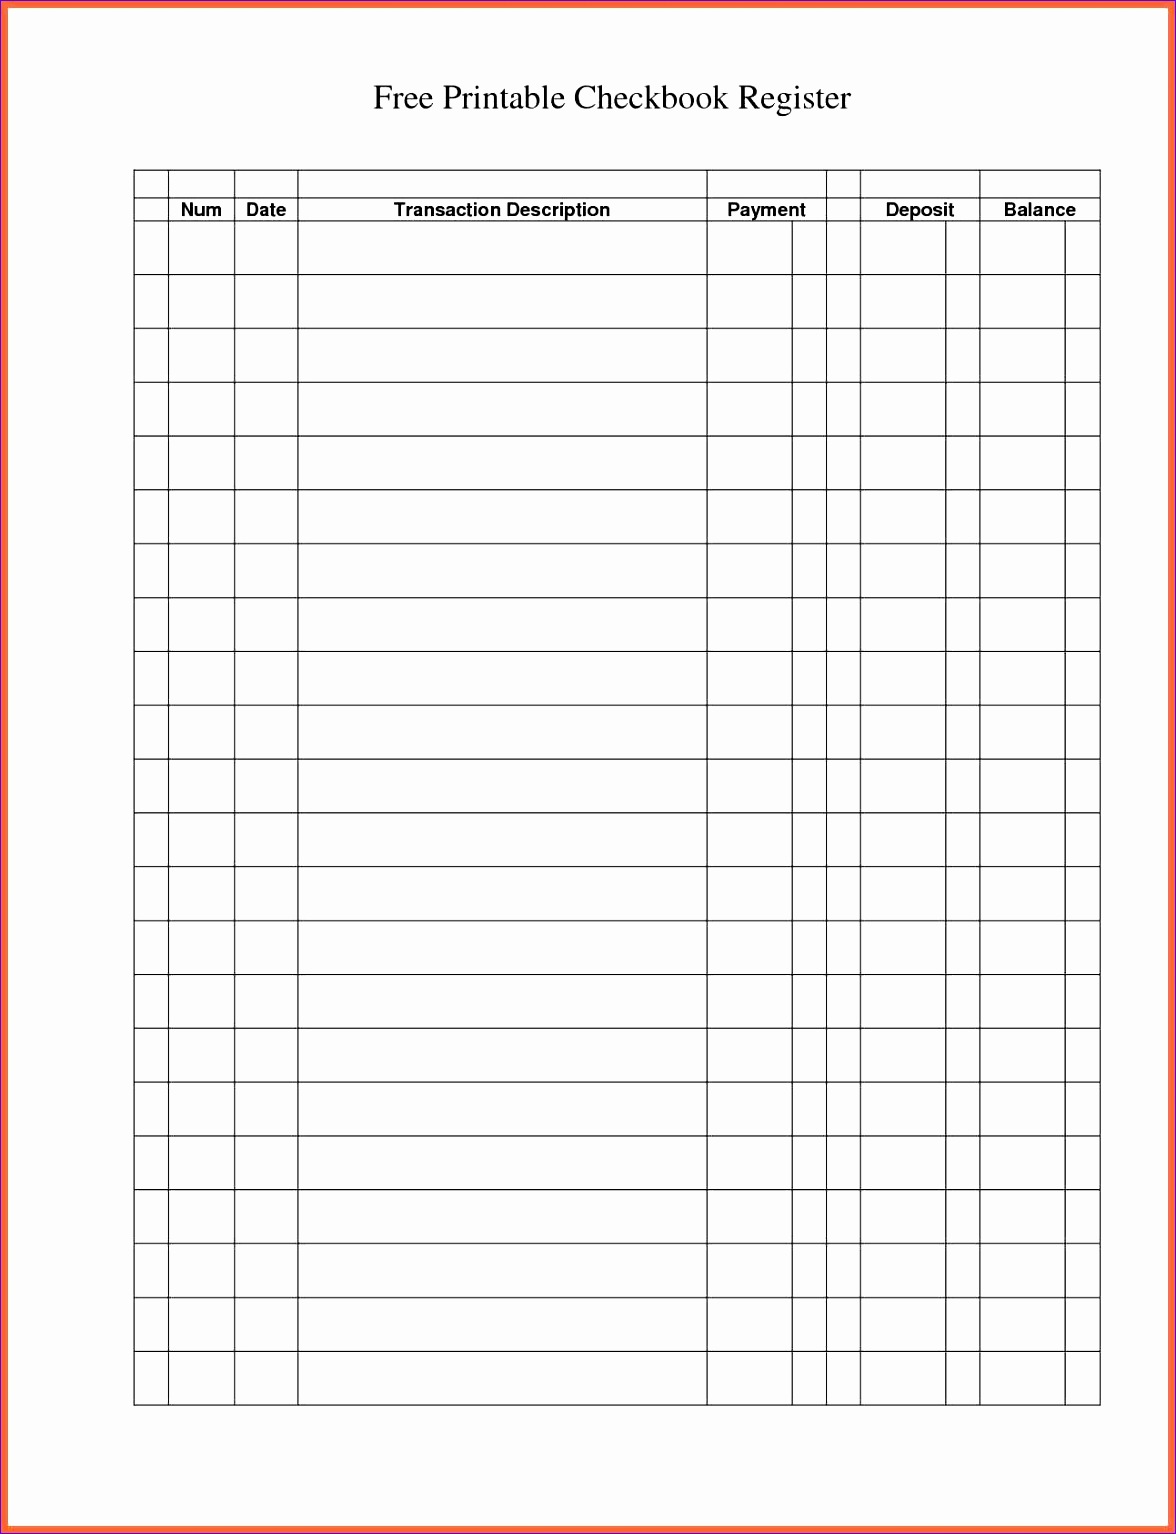 printable check register full page printable bank ledger checkbook register free check template basic s in excel blank rain fake stub templates pdf business for kids learning with word big